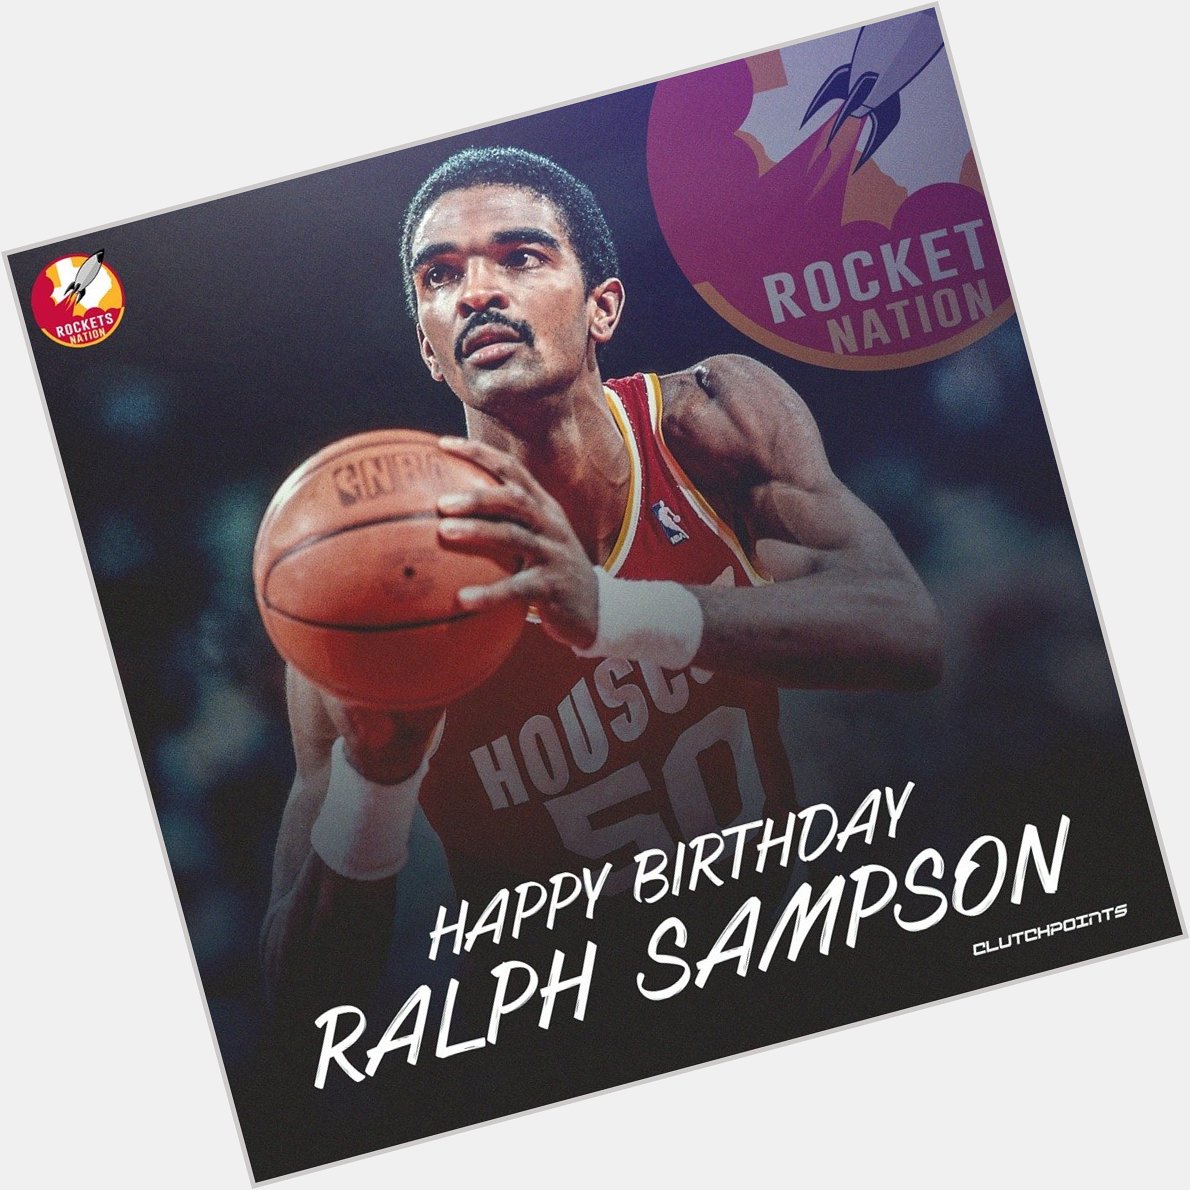 Join Rockets Nation in wishing former 4x All-Star, Ralph Sampson, a happy 59th birthday!   